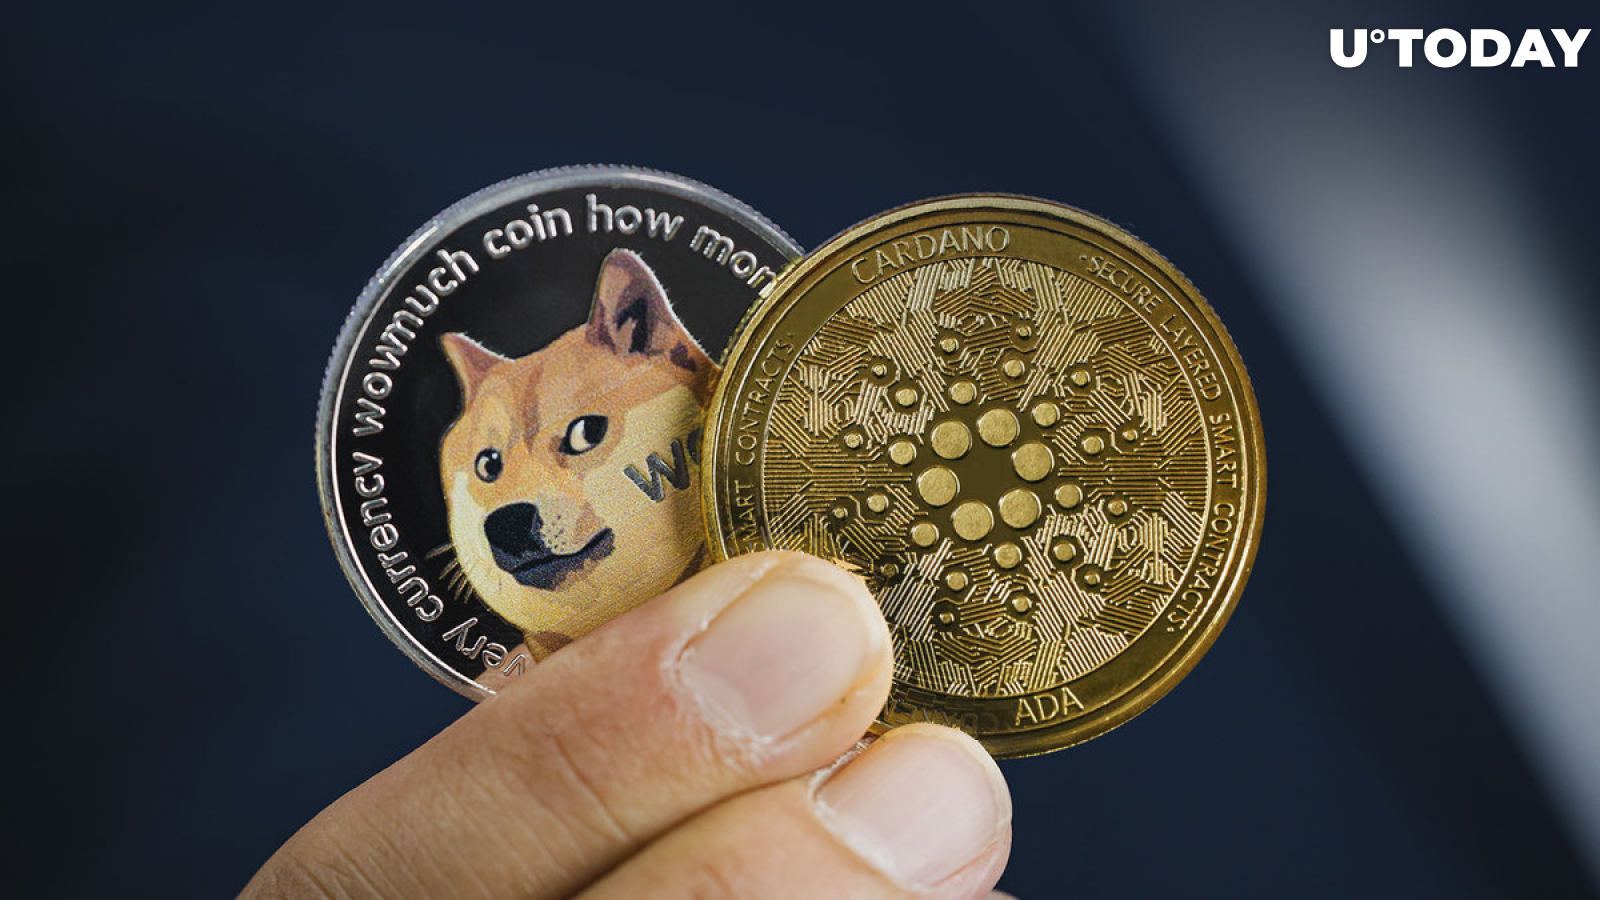 Dogecoin (DOGE) Ahead of Cardano After Explosive Price Performance